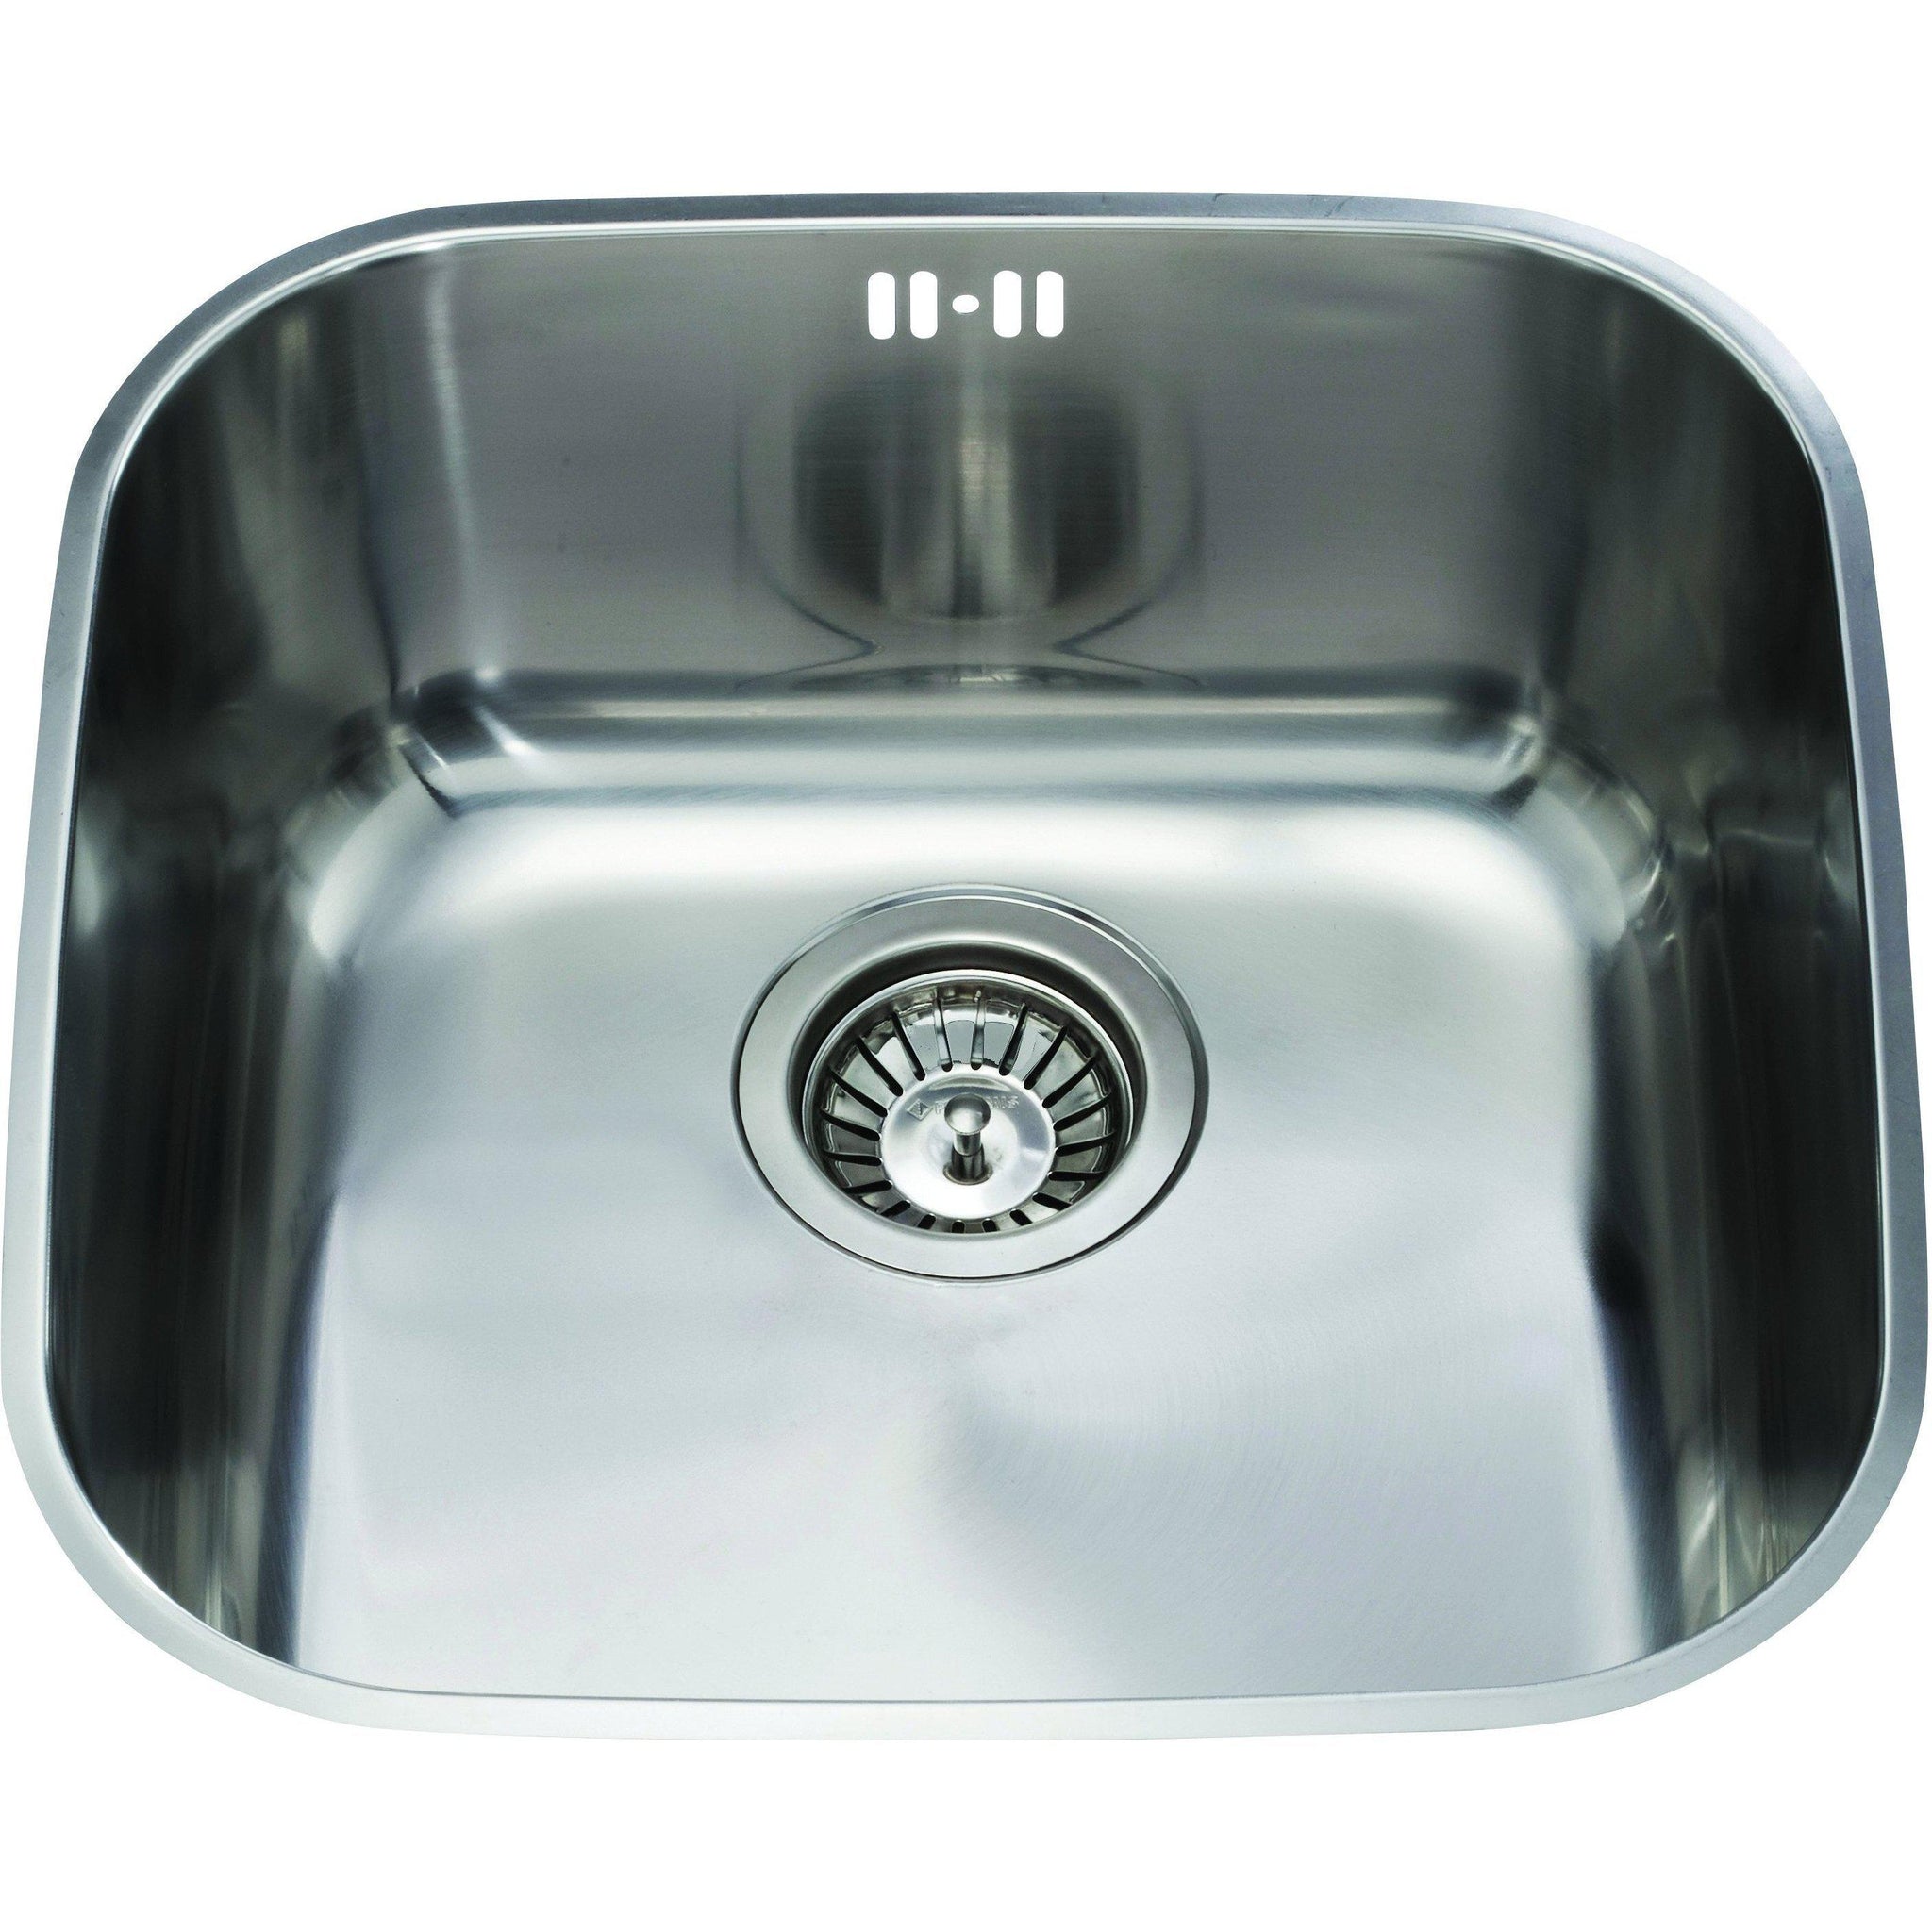 Cda Kcc23ss Undermount Curved Single Bowl Sink Stainless Steel